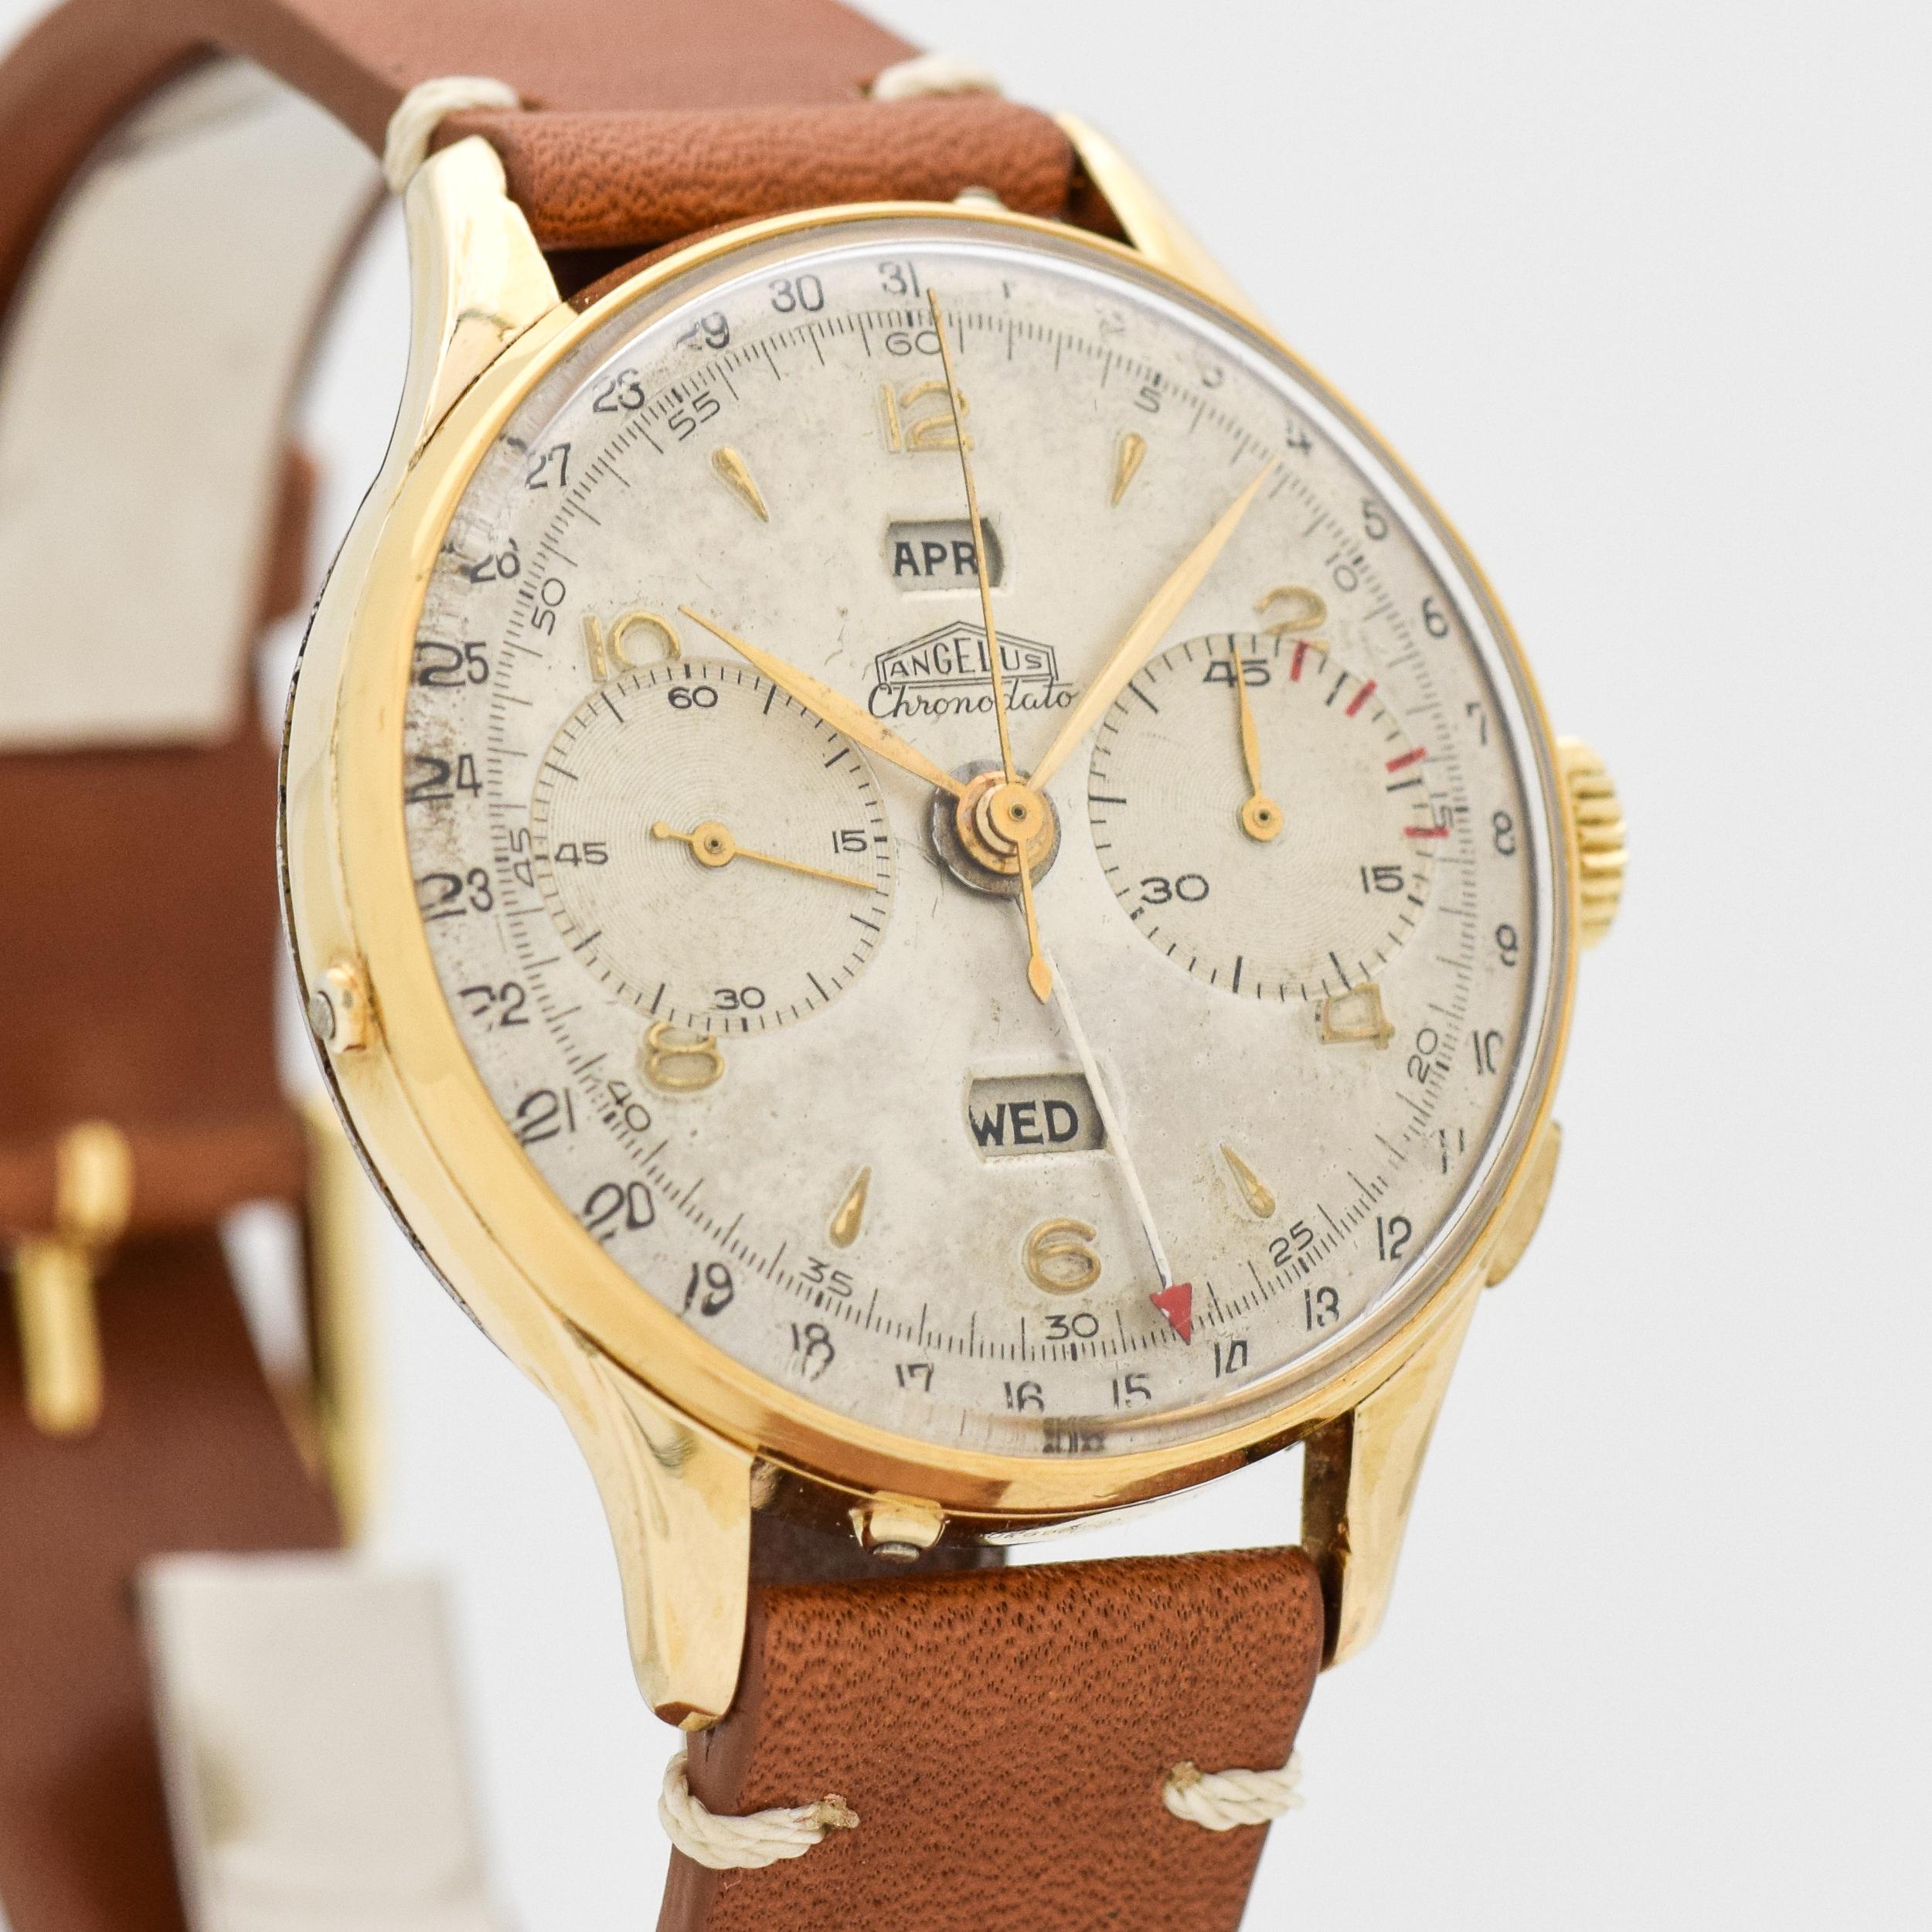 1950's Vintage Angelus Chronodata Triple Date Calendar 2 Register Chronograph Large 38 mm Wide 14k Yellow Gold Filled with Stainless Steel Case Back watch with Original Silver Dial with Applied Gold Color Arabic 2, 4. 6, 8, 10, and 12 with Elongated